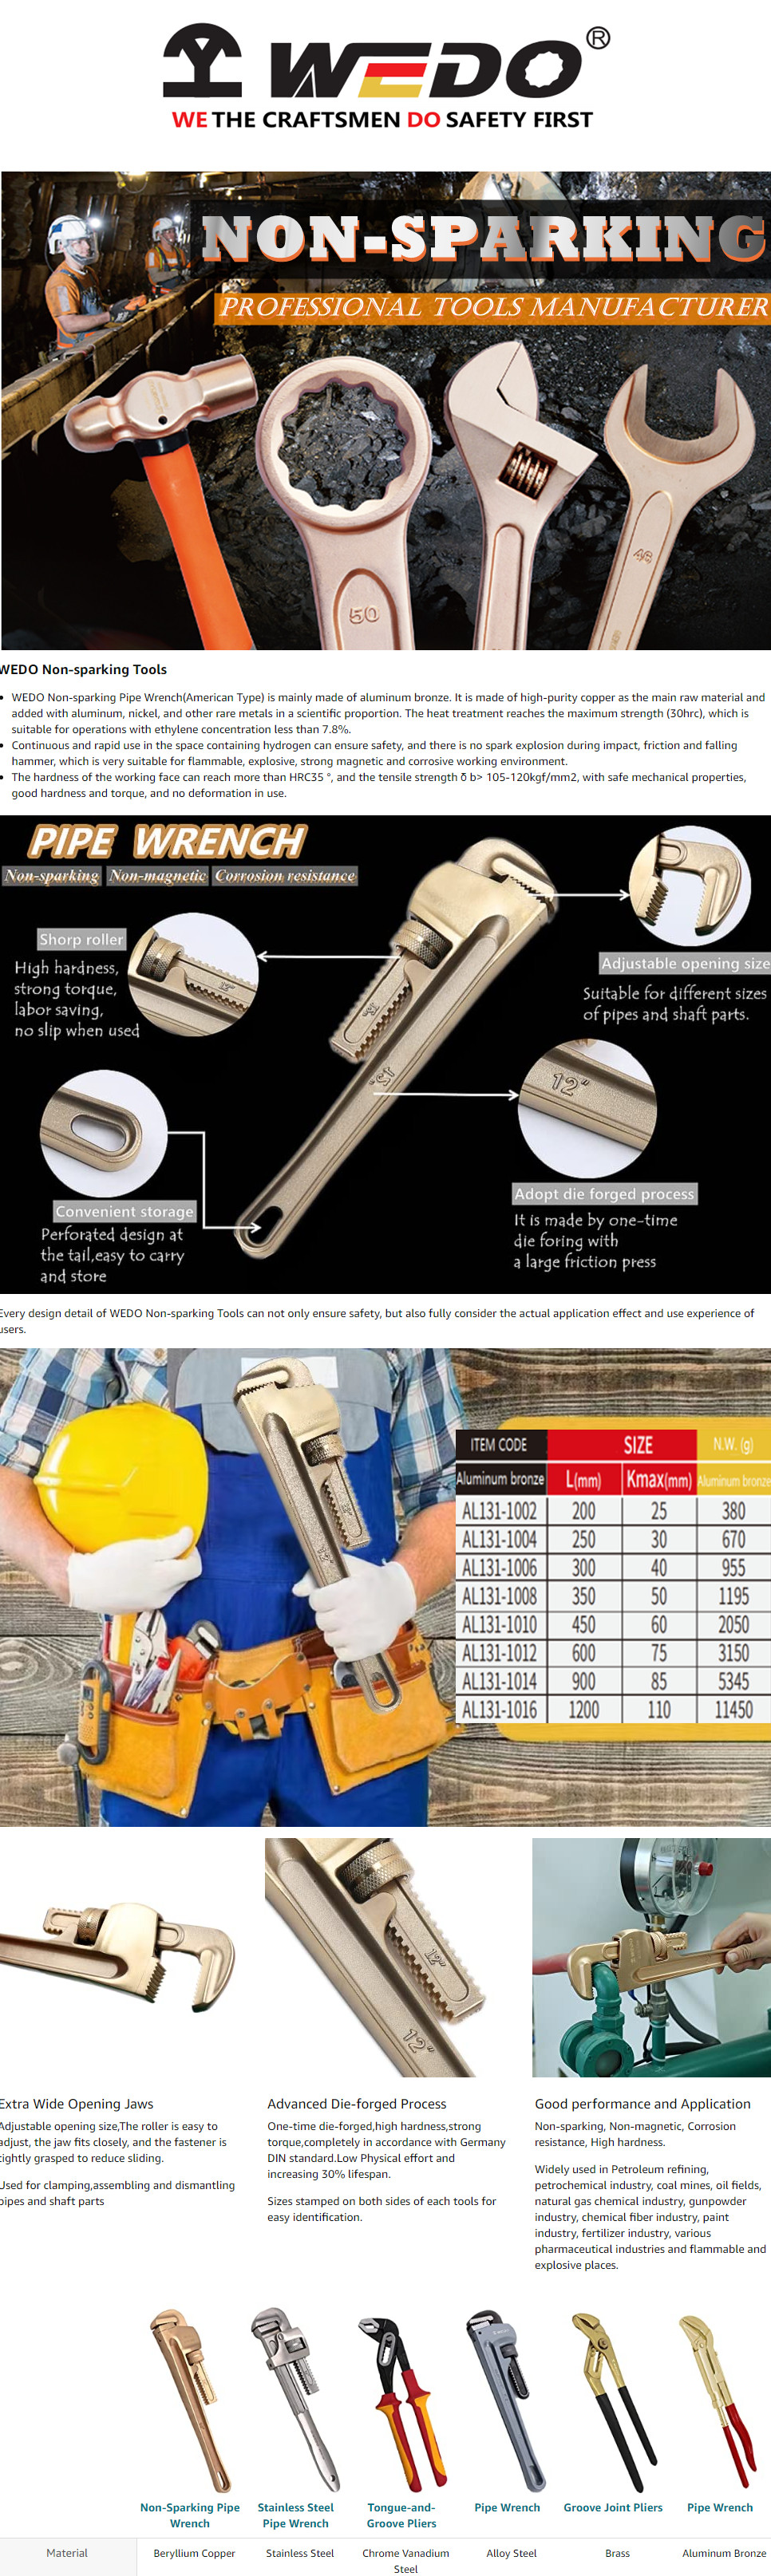 WEDO Non-Sparking Pipe Wrench (Length 300mm, Opening Max 40mm), Spark-Free  Straight Plumbing Wrench, No Spark Safety Spanner, Aluminum Bronze